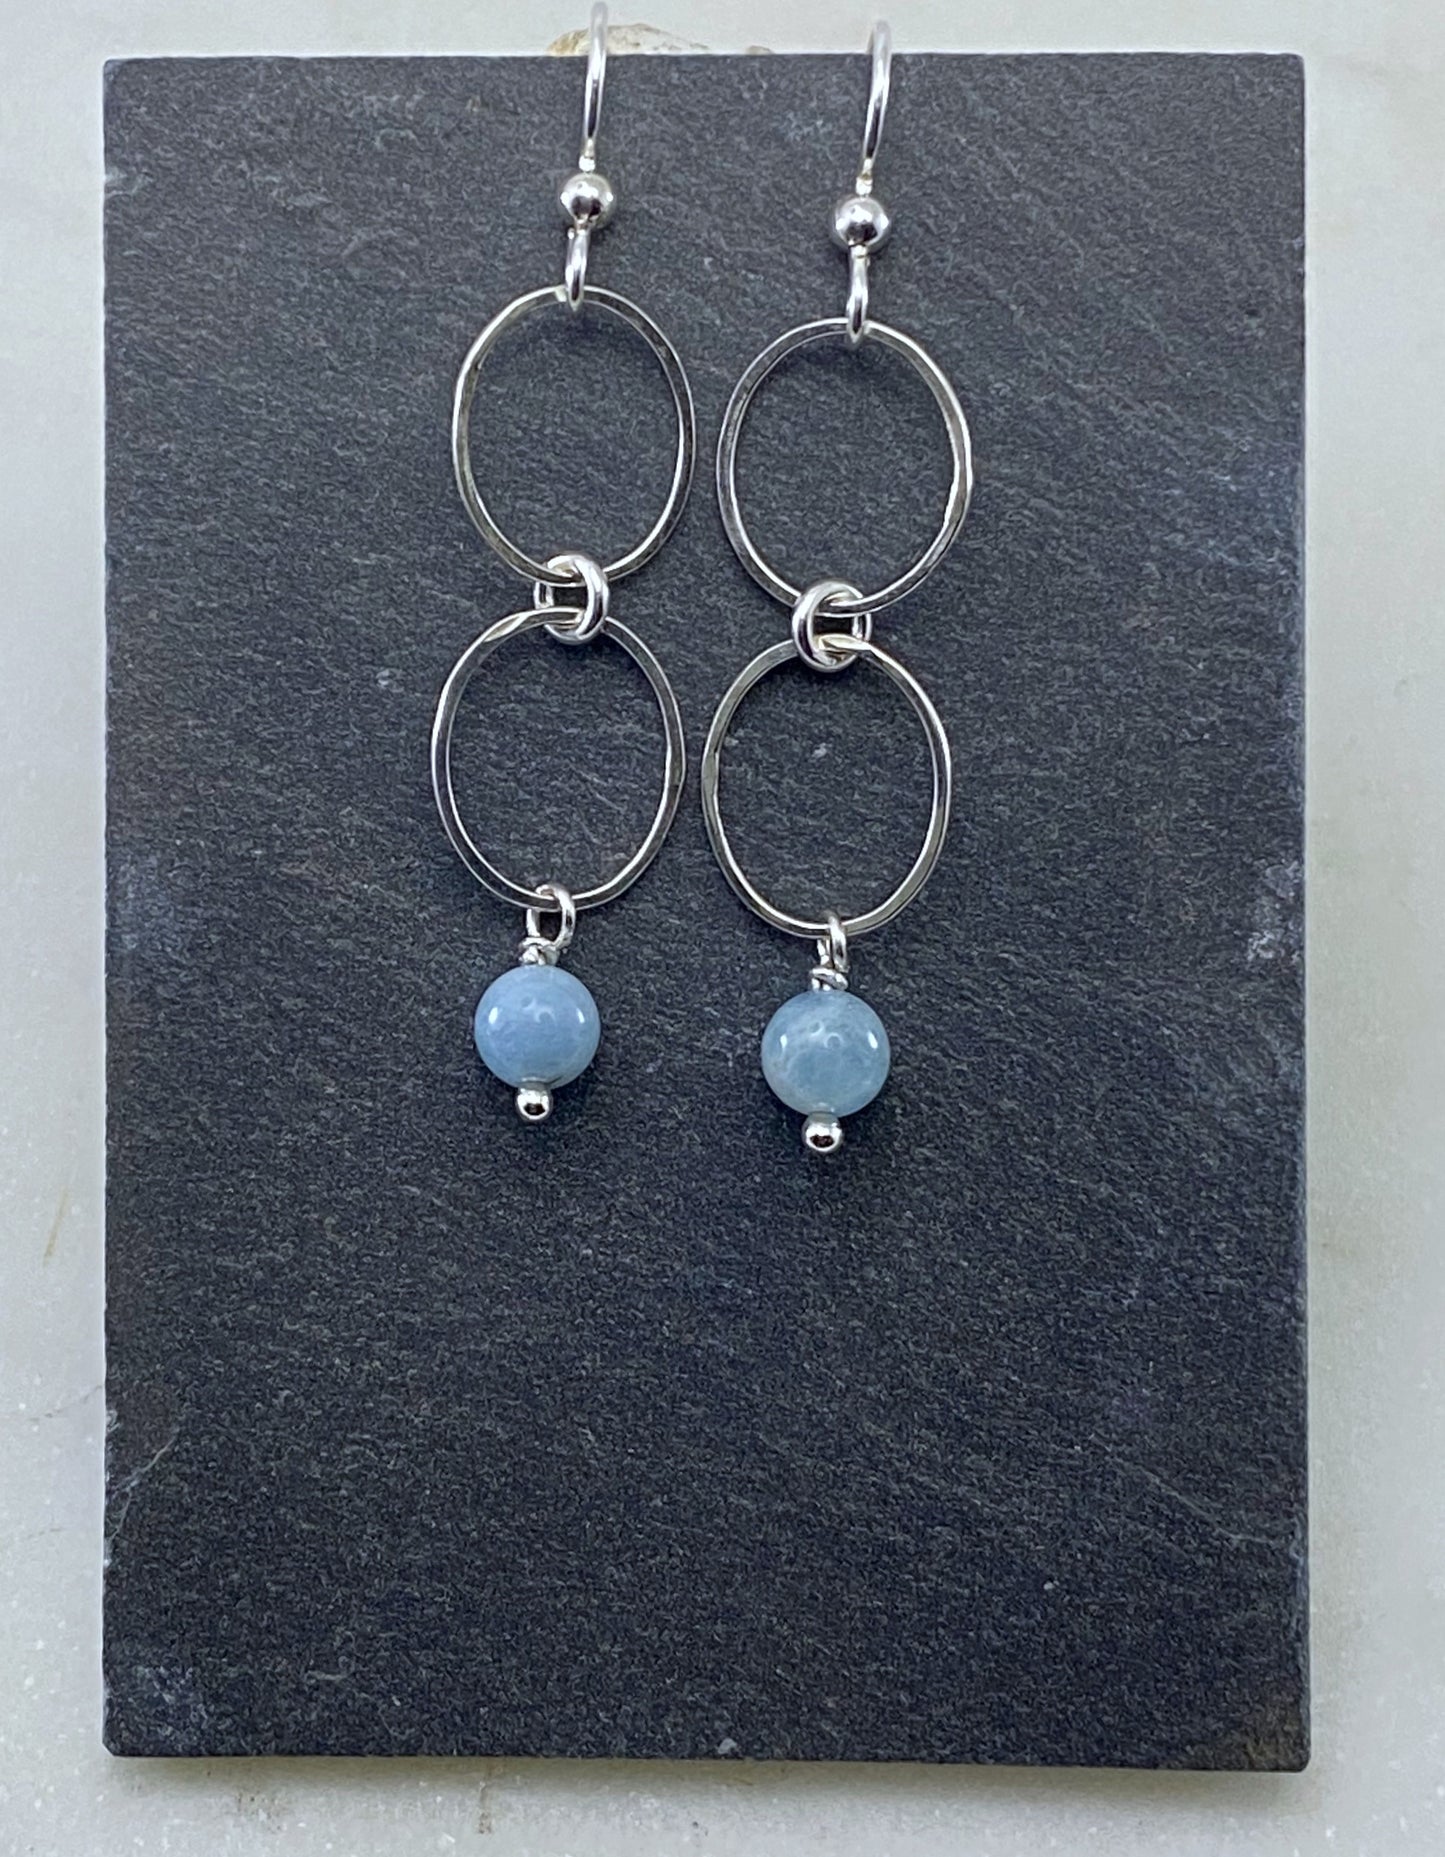 Sterling earrings with aquamarine